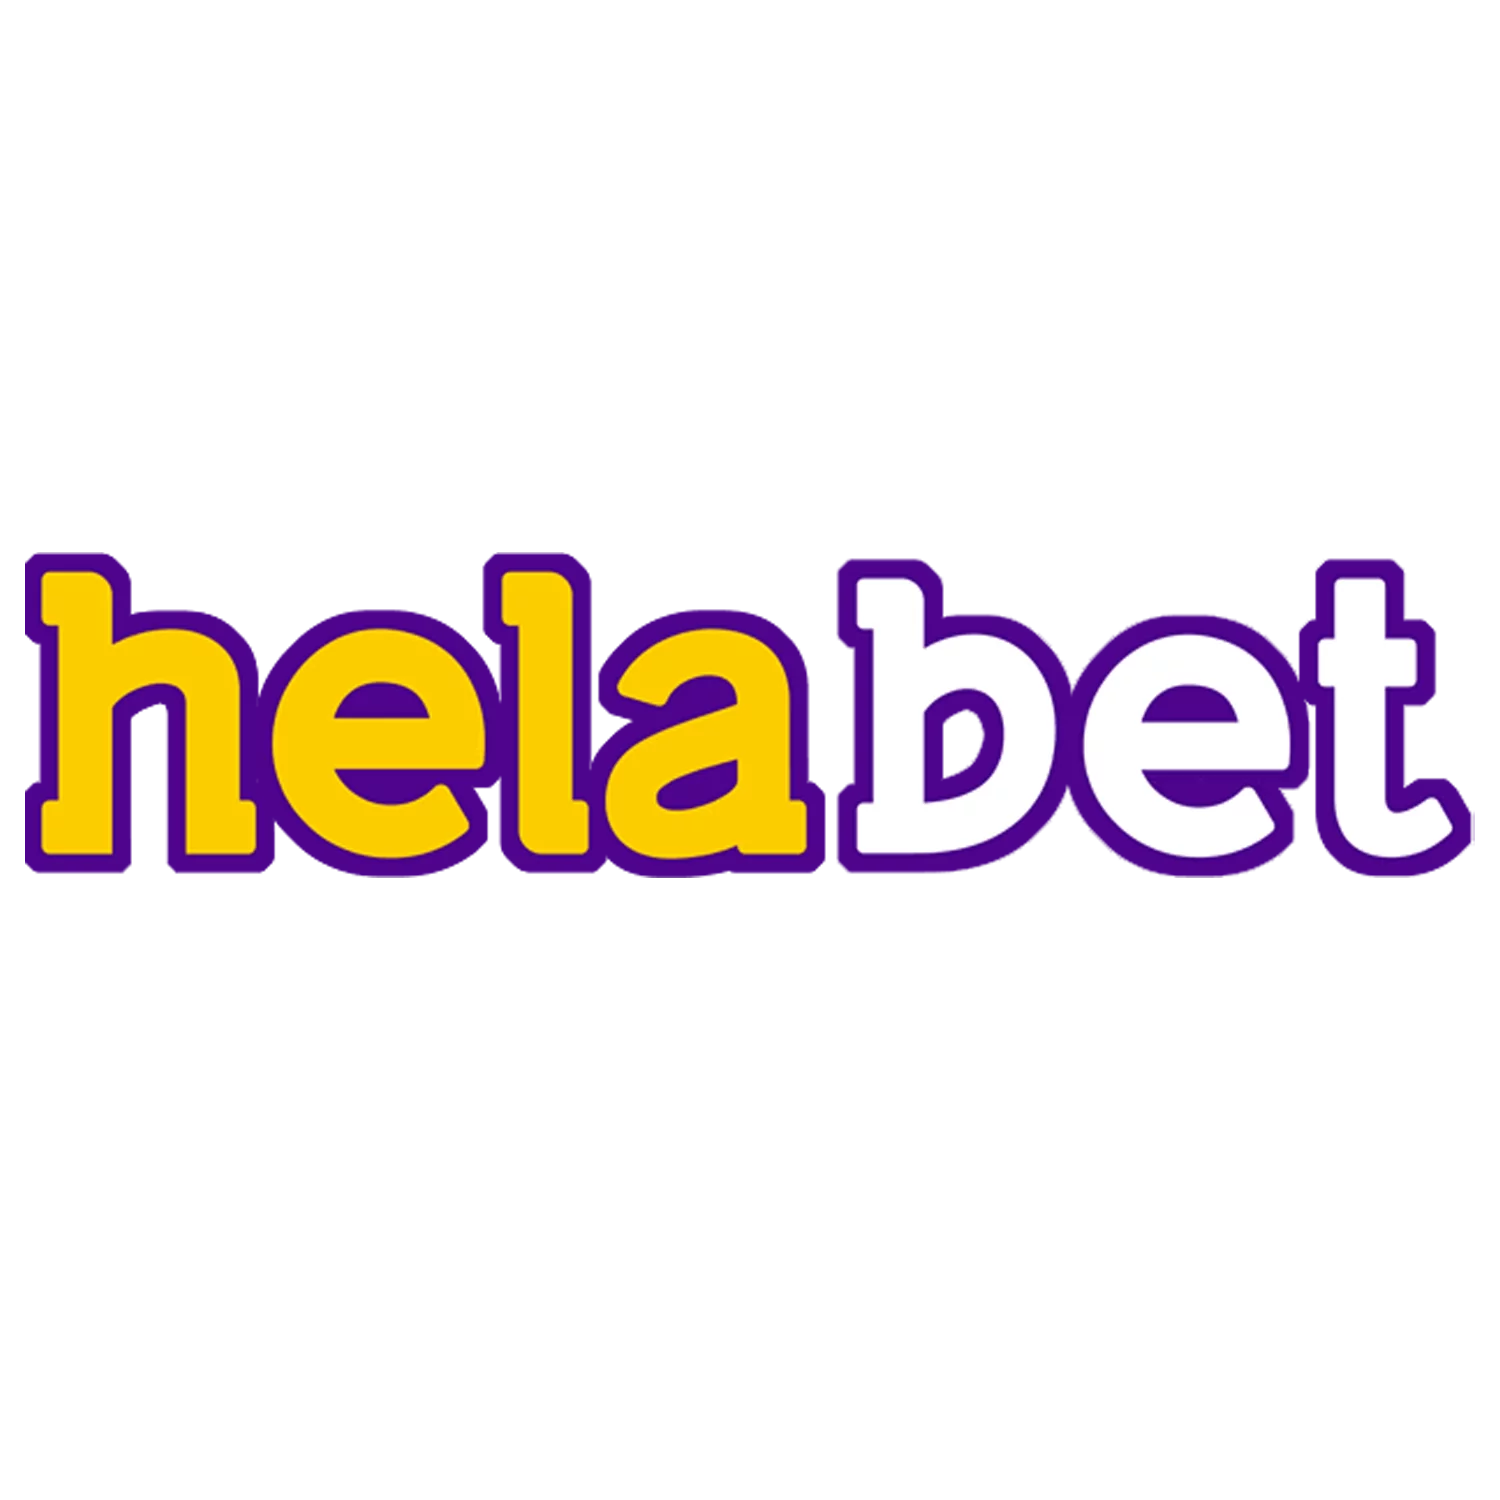 Helabet is quite popular in India for cricket betting.